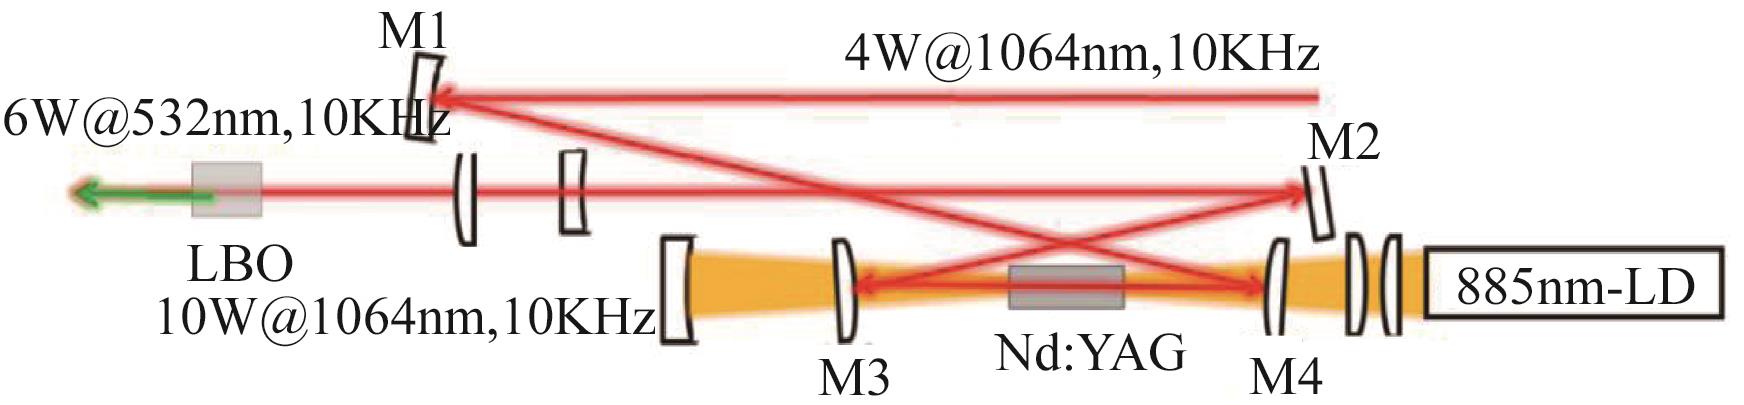 Side-pump Nd:YAG crystal amplification by 885 nm.